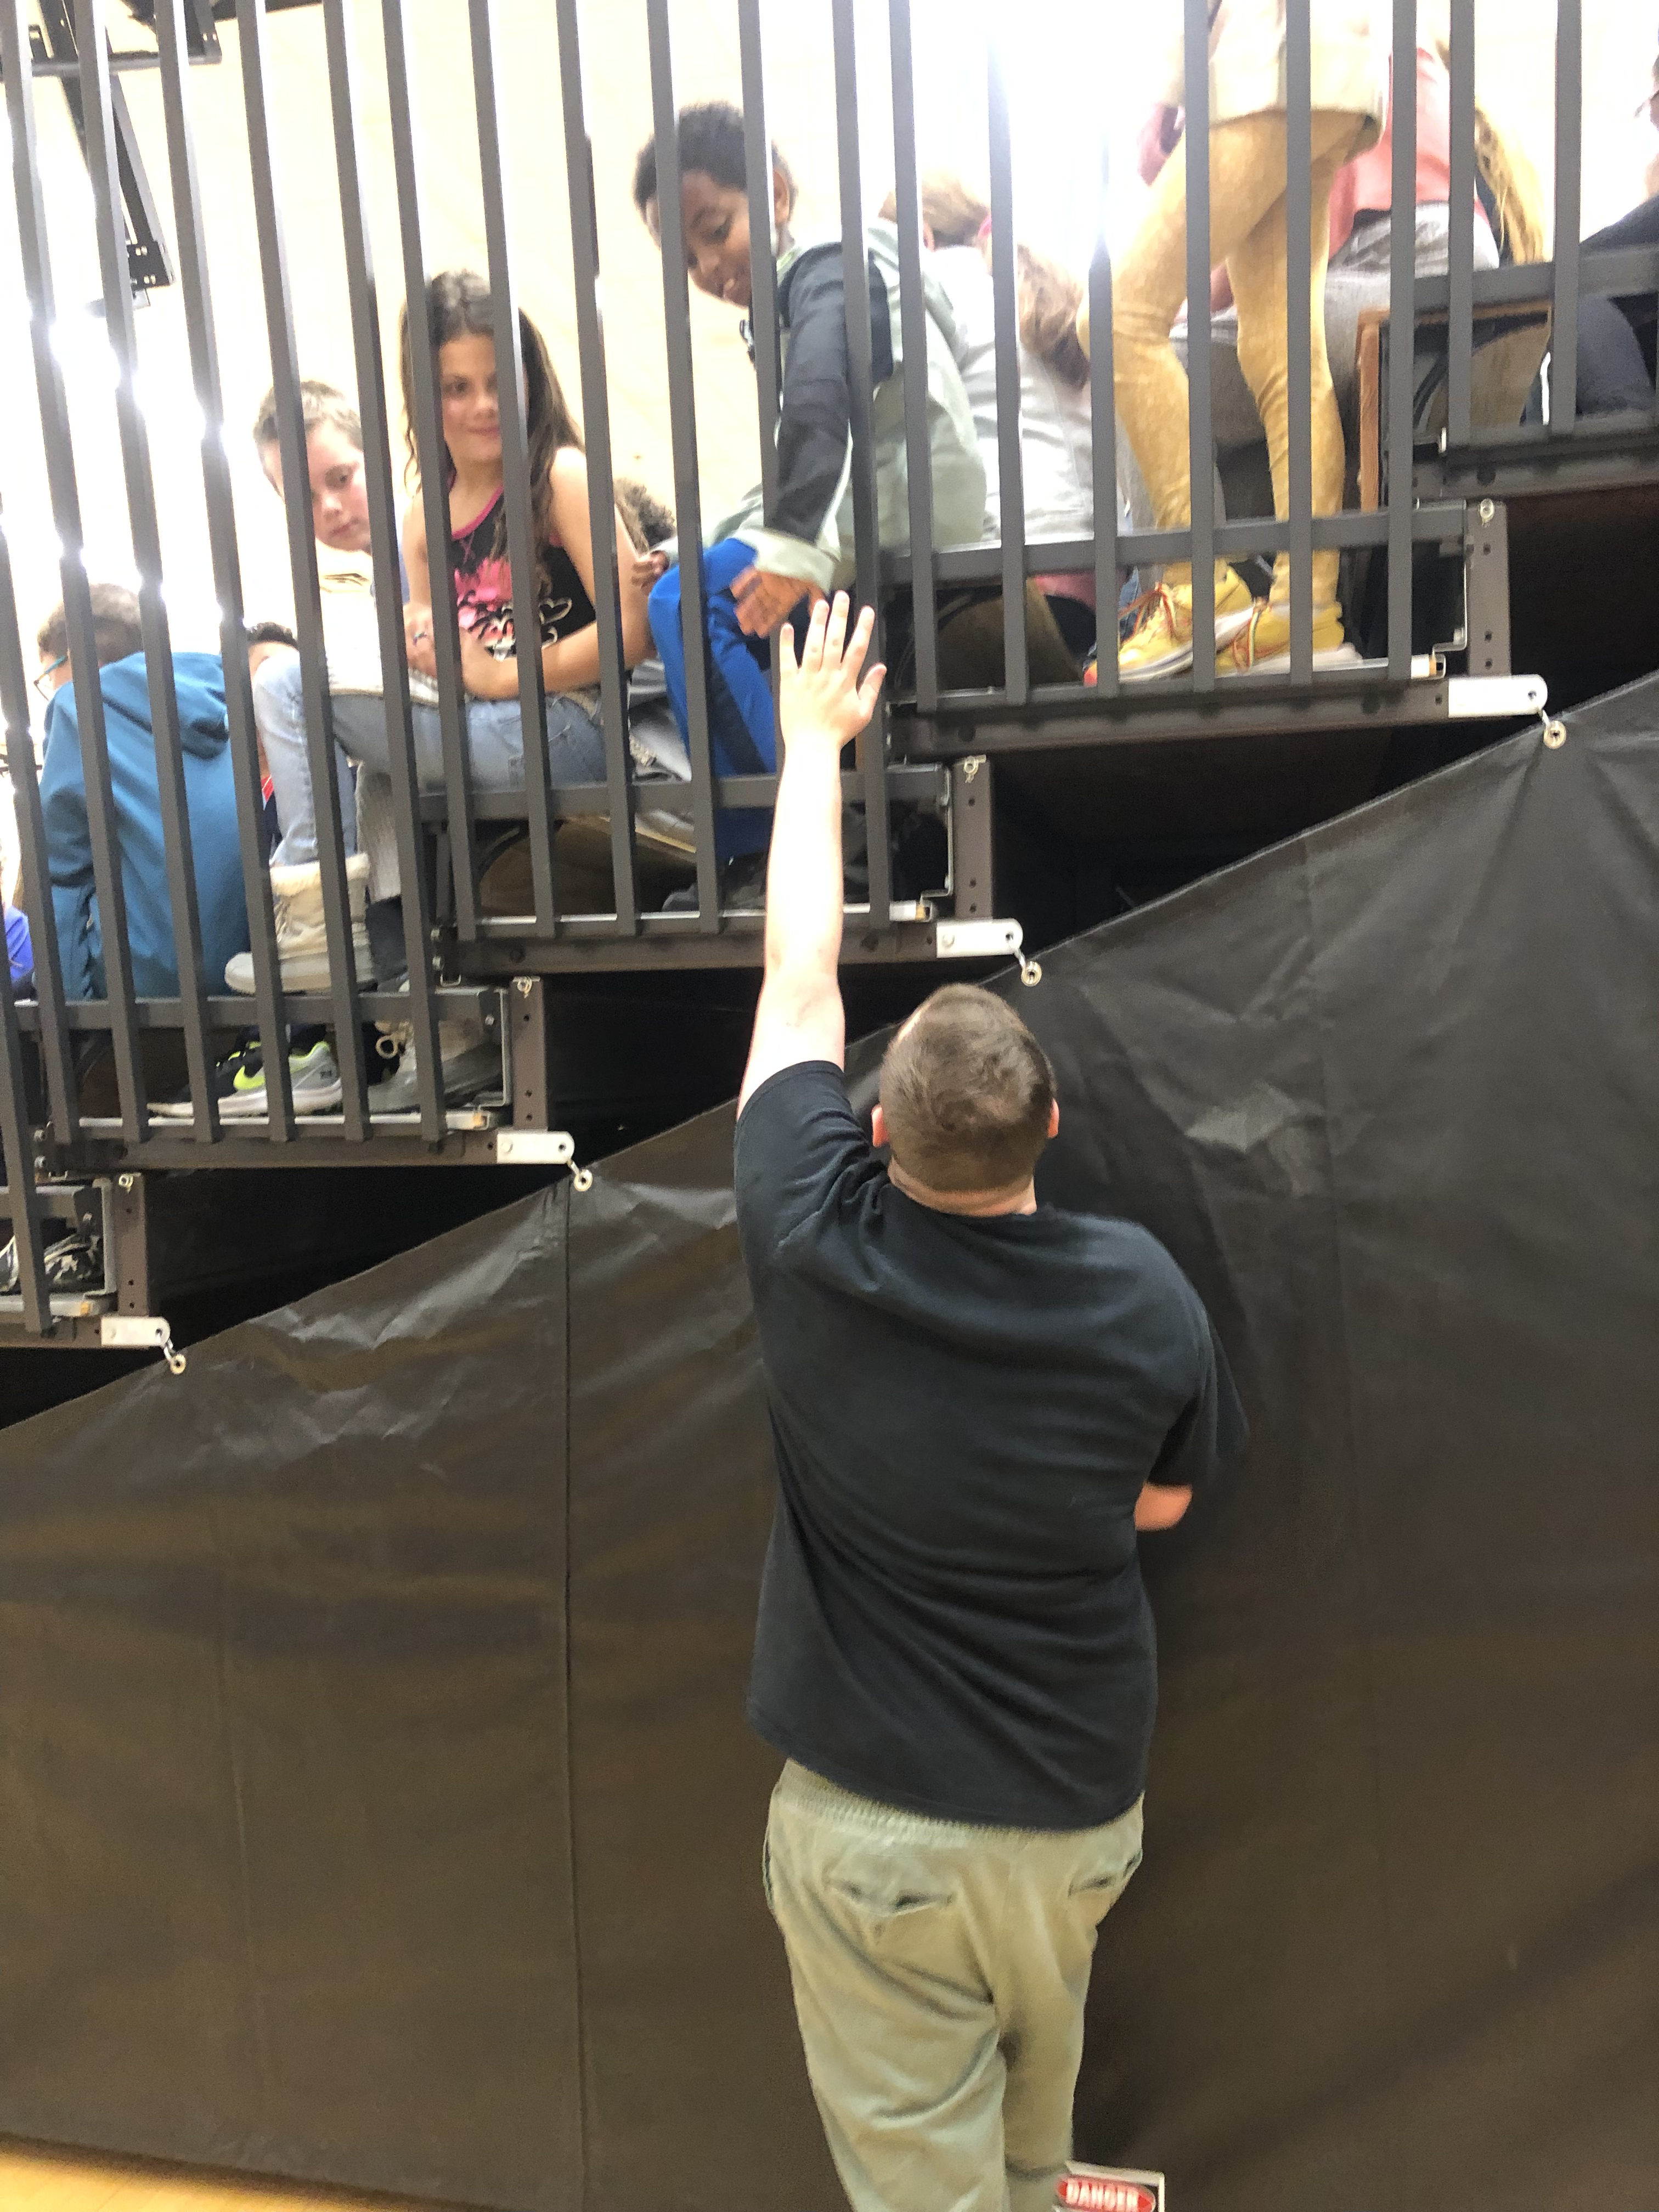 Sam reaches up into the bleachers to touch the hand of a fan. The fan smiles broadly.